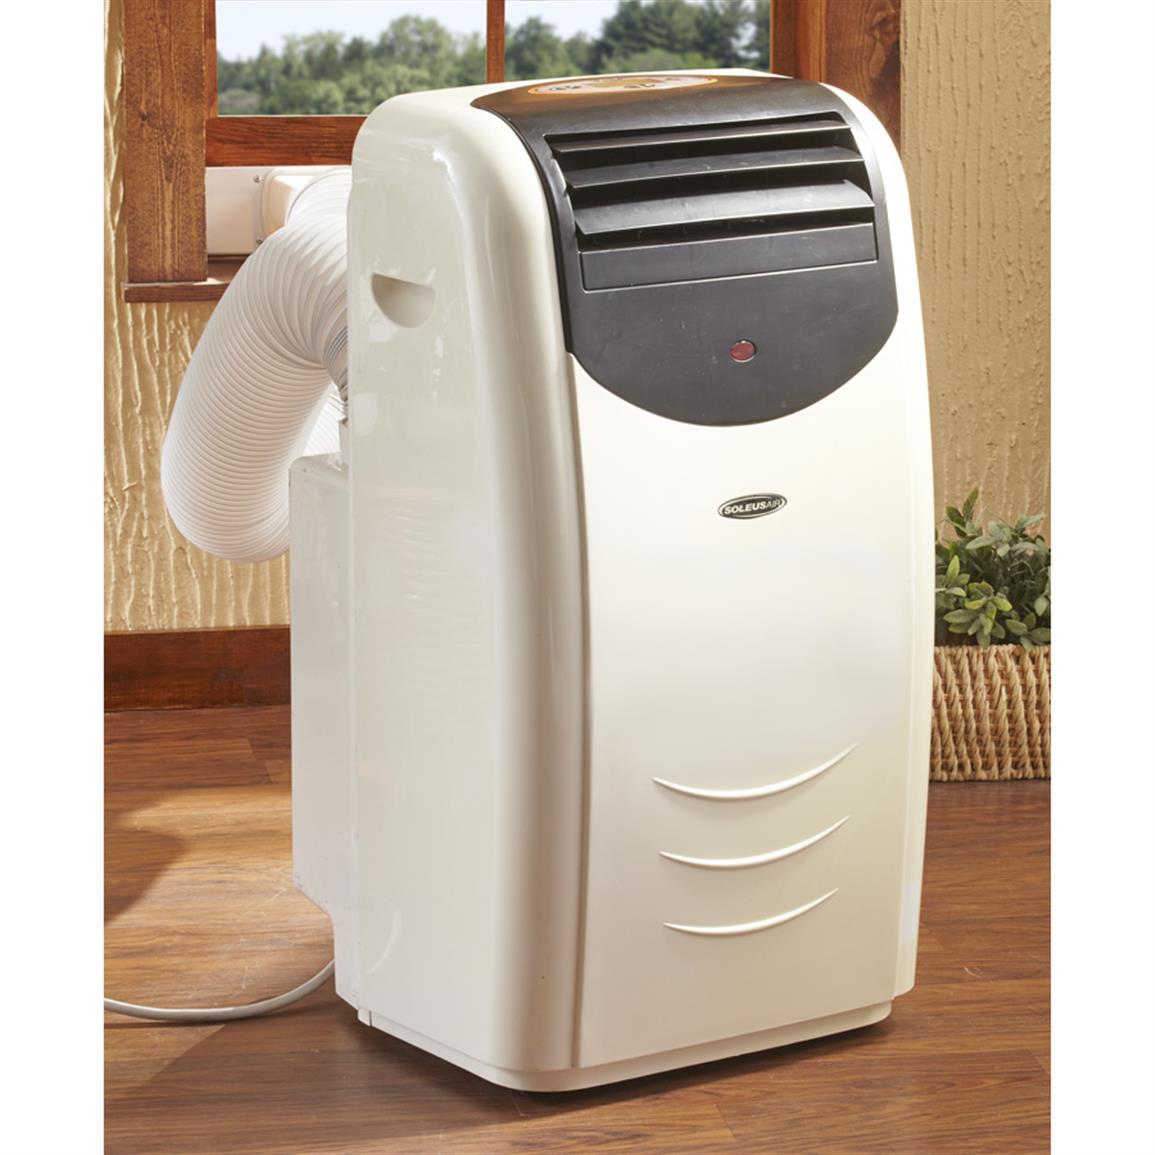 Portable Room Air Conditioners Are Gaining Popularity